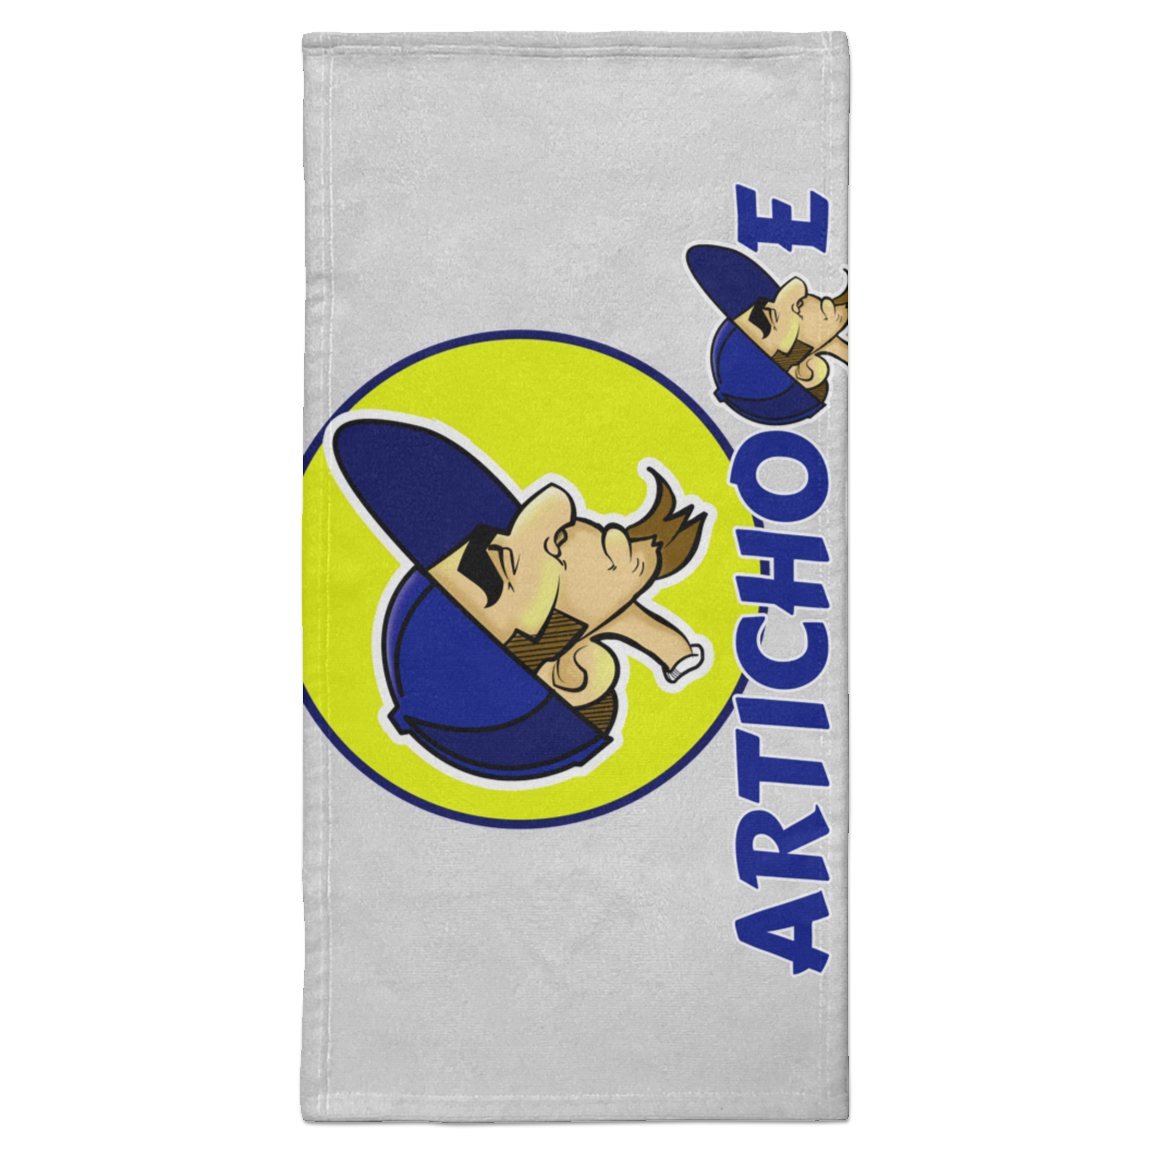 ZZ#20 ArtichokeUSA Characters and Fonts. "Clem" Let’s Create Your Own Design Today. Towel - 15x30